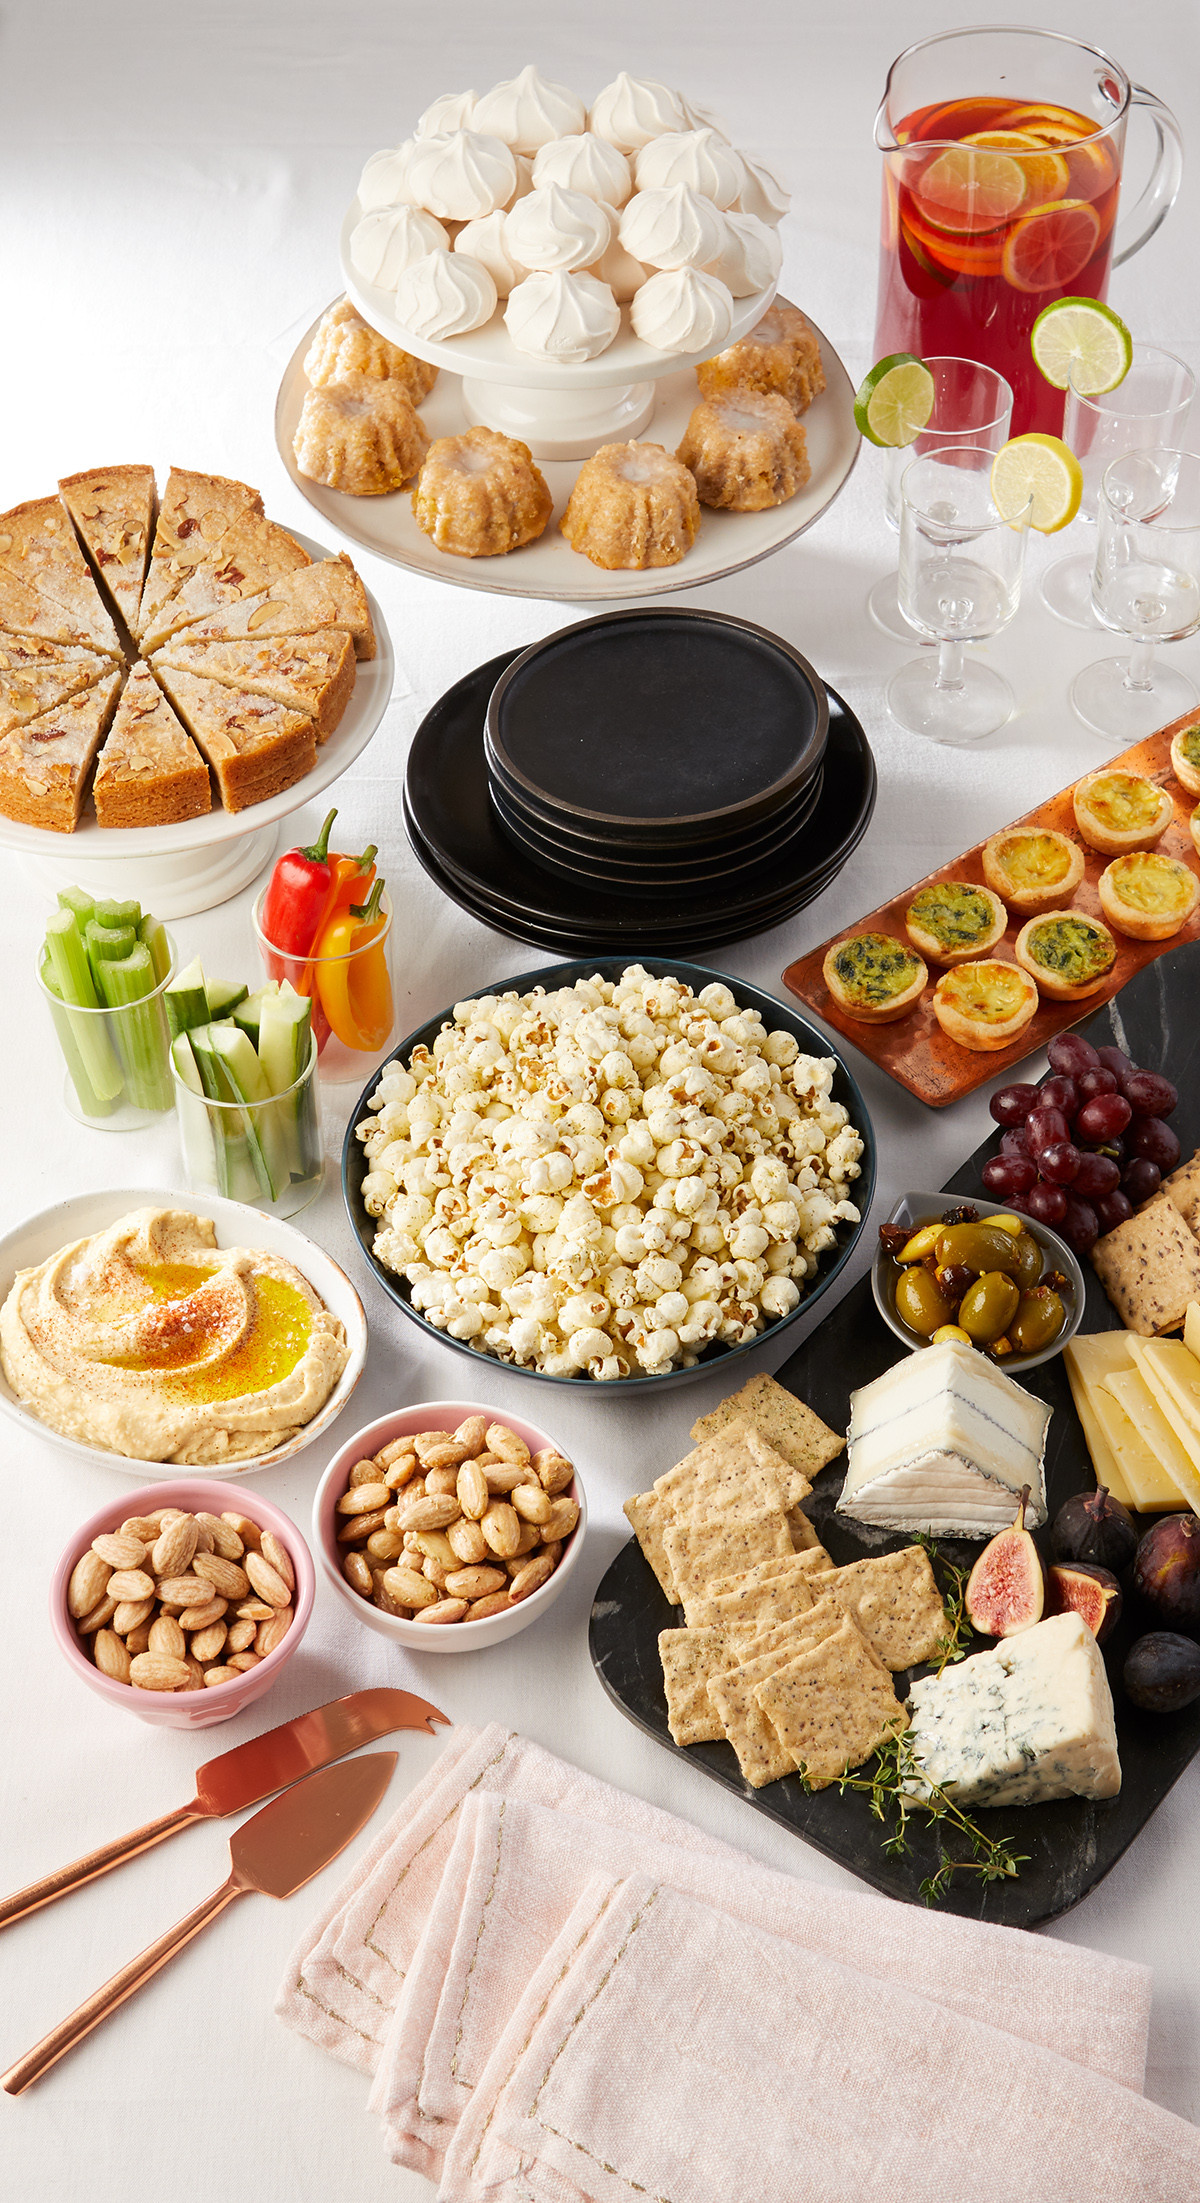 Best Dinner Party Ideas
 Host an Appetizers ly Dinner Party Finger Food Ideas